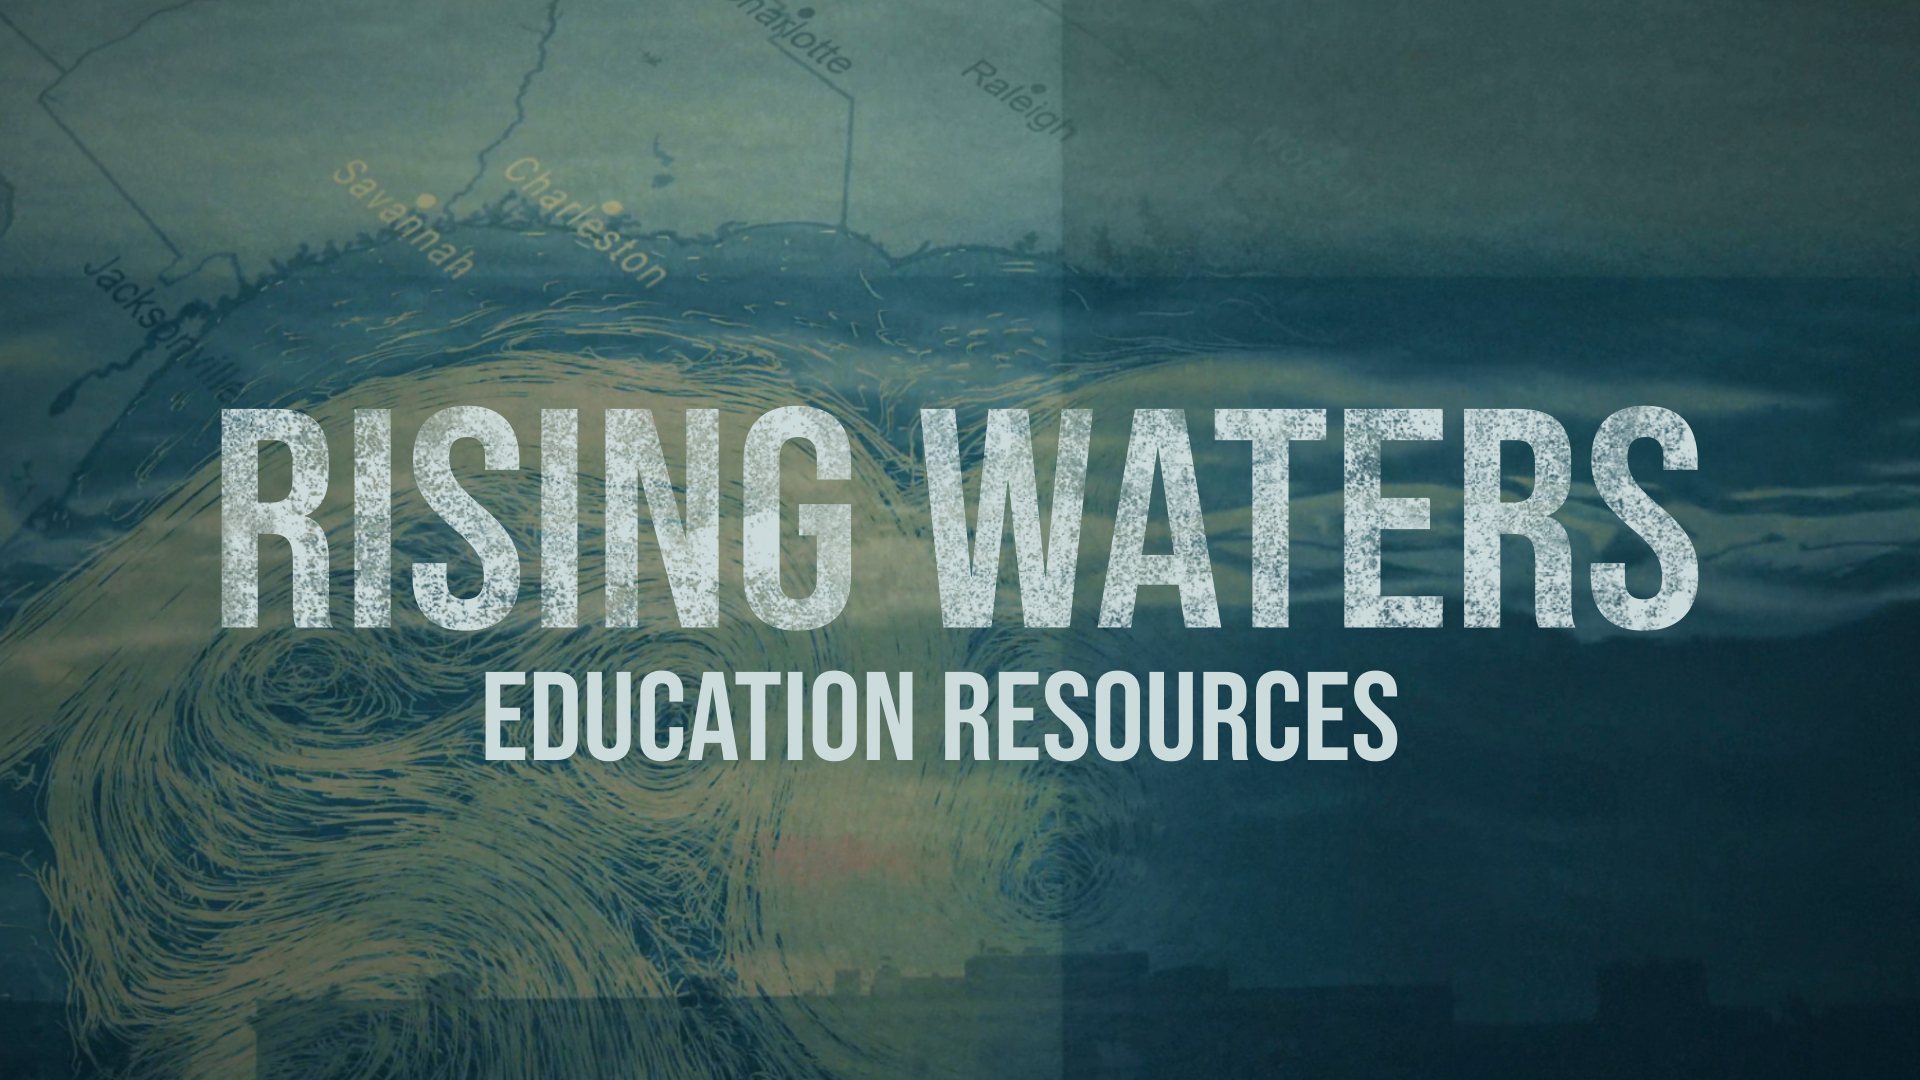 A banner illustration with text saying "Rising Waters Education Resources" in worn-looking white text, on a background of soft turquoise ocean water with currents illustrated in transparent beige.